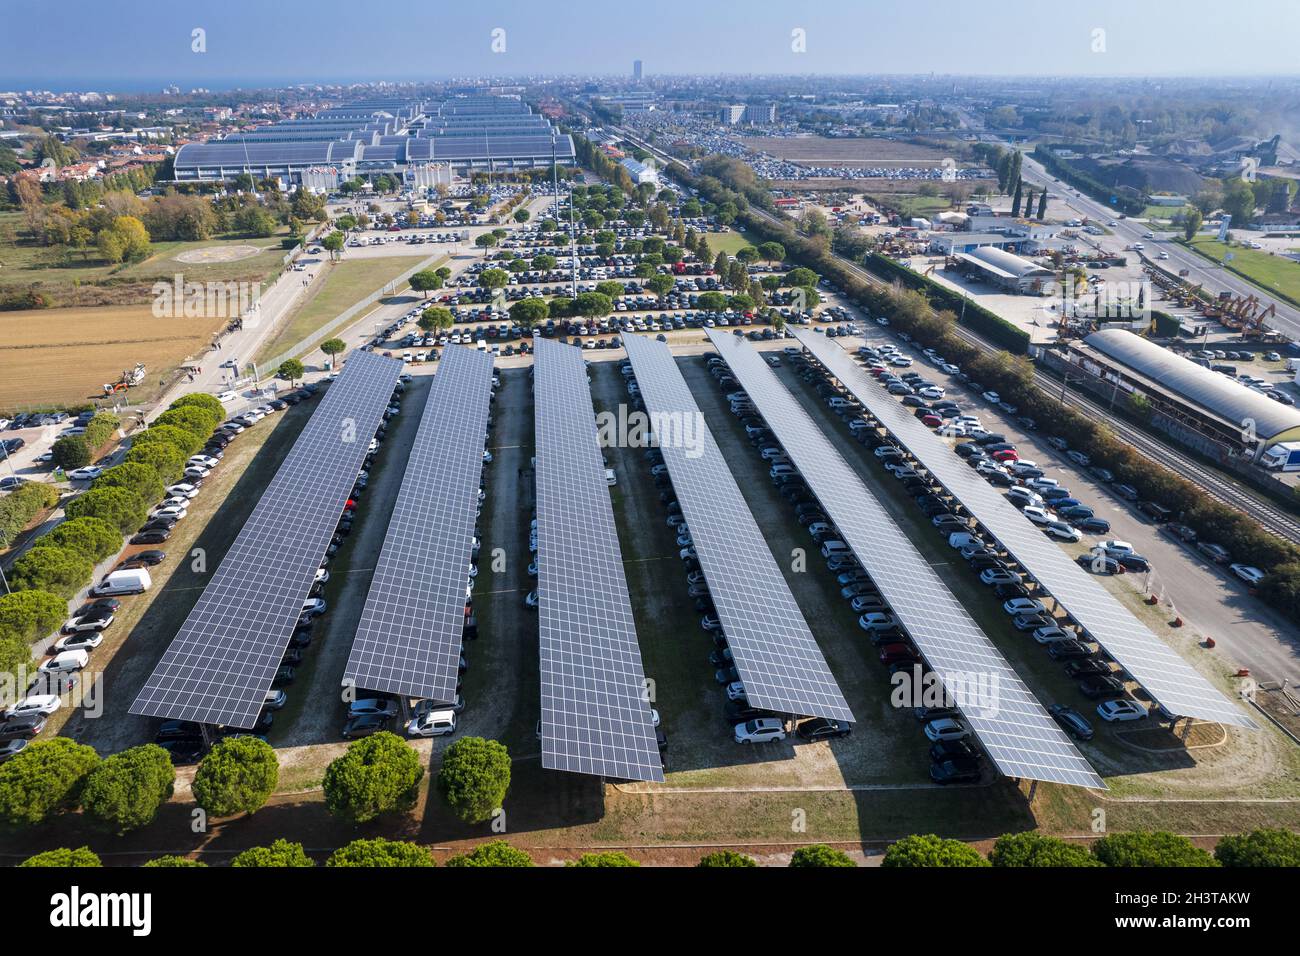 Aerial view of a car park with solar panels. Rimini, Italy - October 2021 Stock Photo